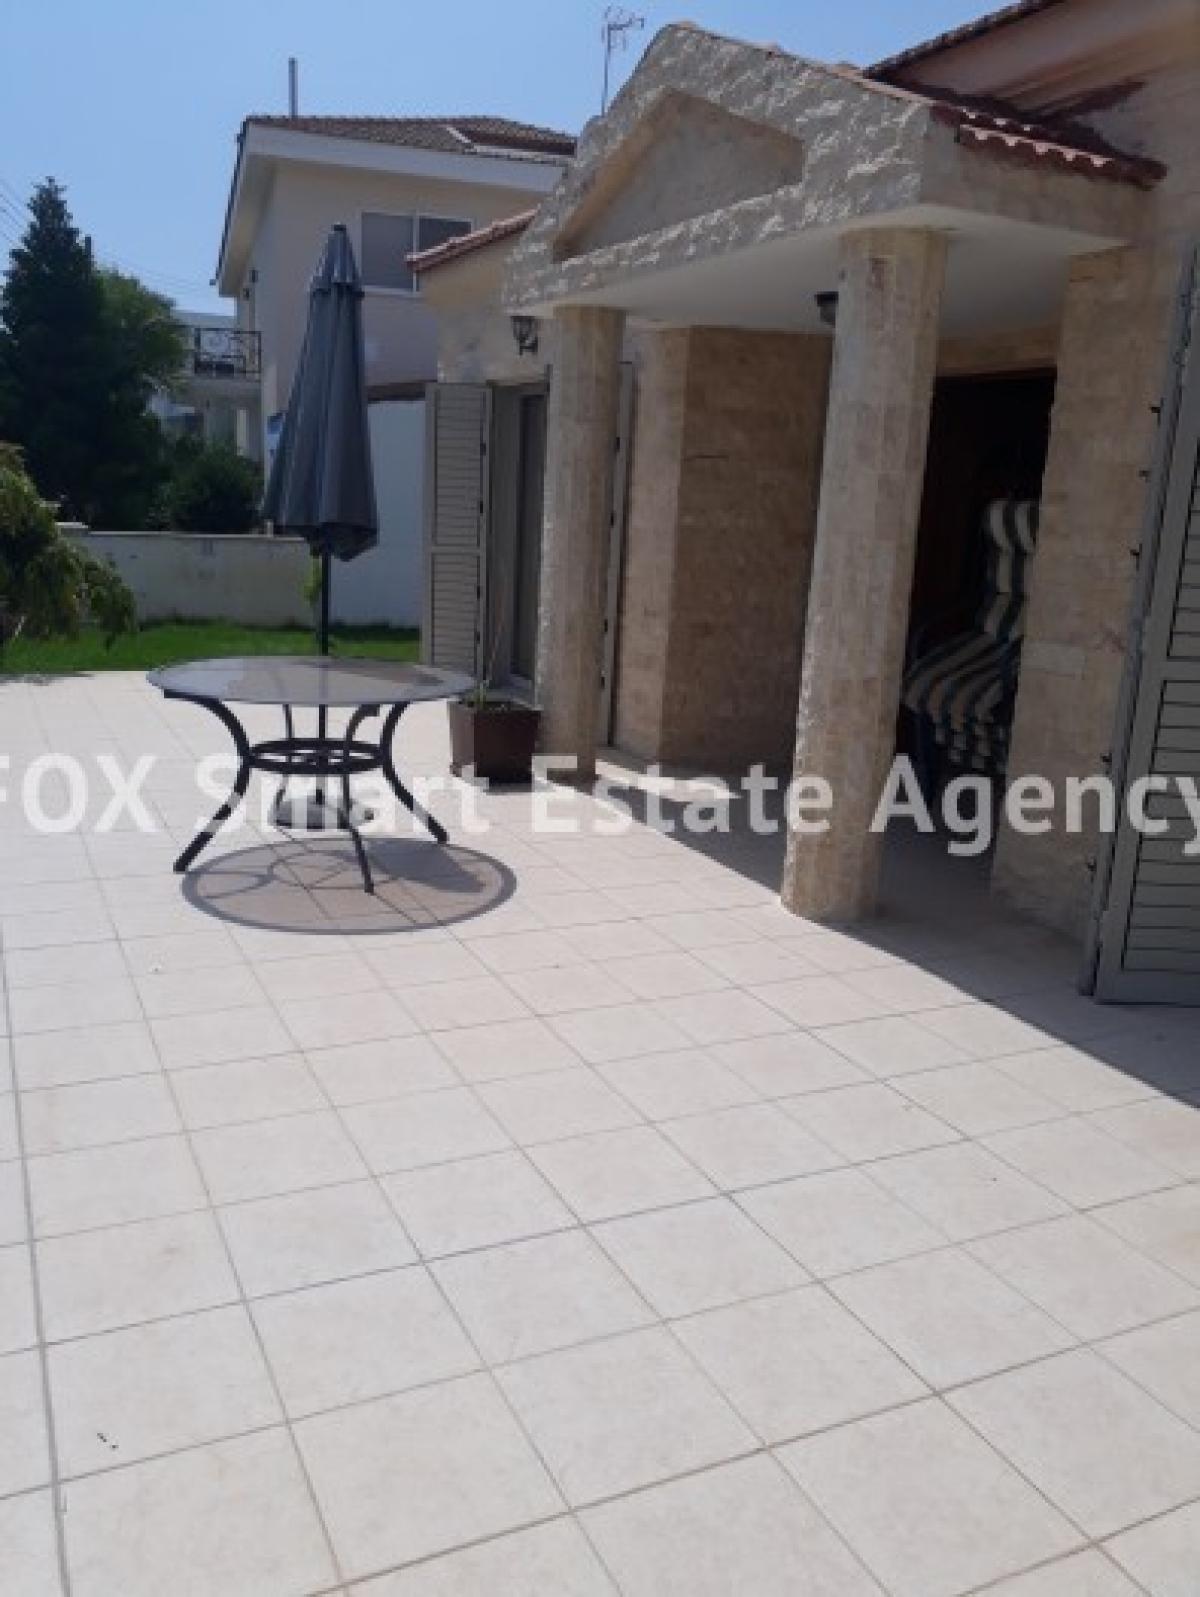 Picture of Bungalow For Rent in Asomatos, Limassol, Cyprus